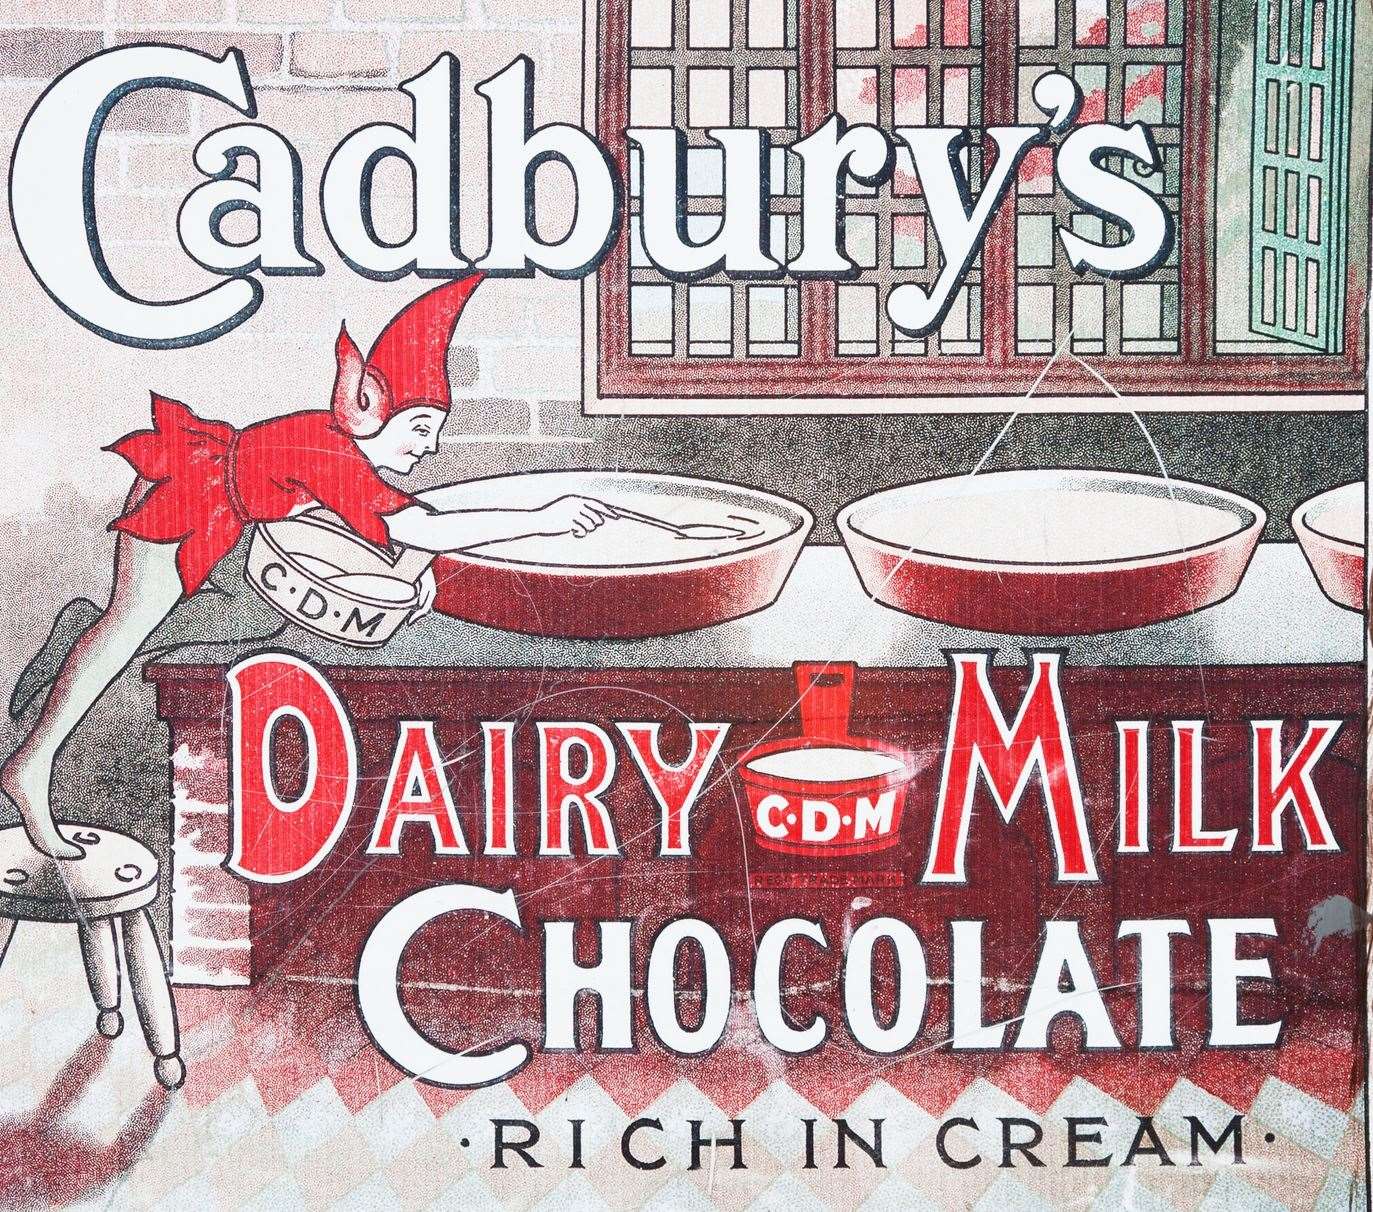 An old Cadbury advertisement from the 1920s – the firm is this year celebrating 200 years of business. Image: iStock.